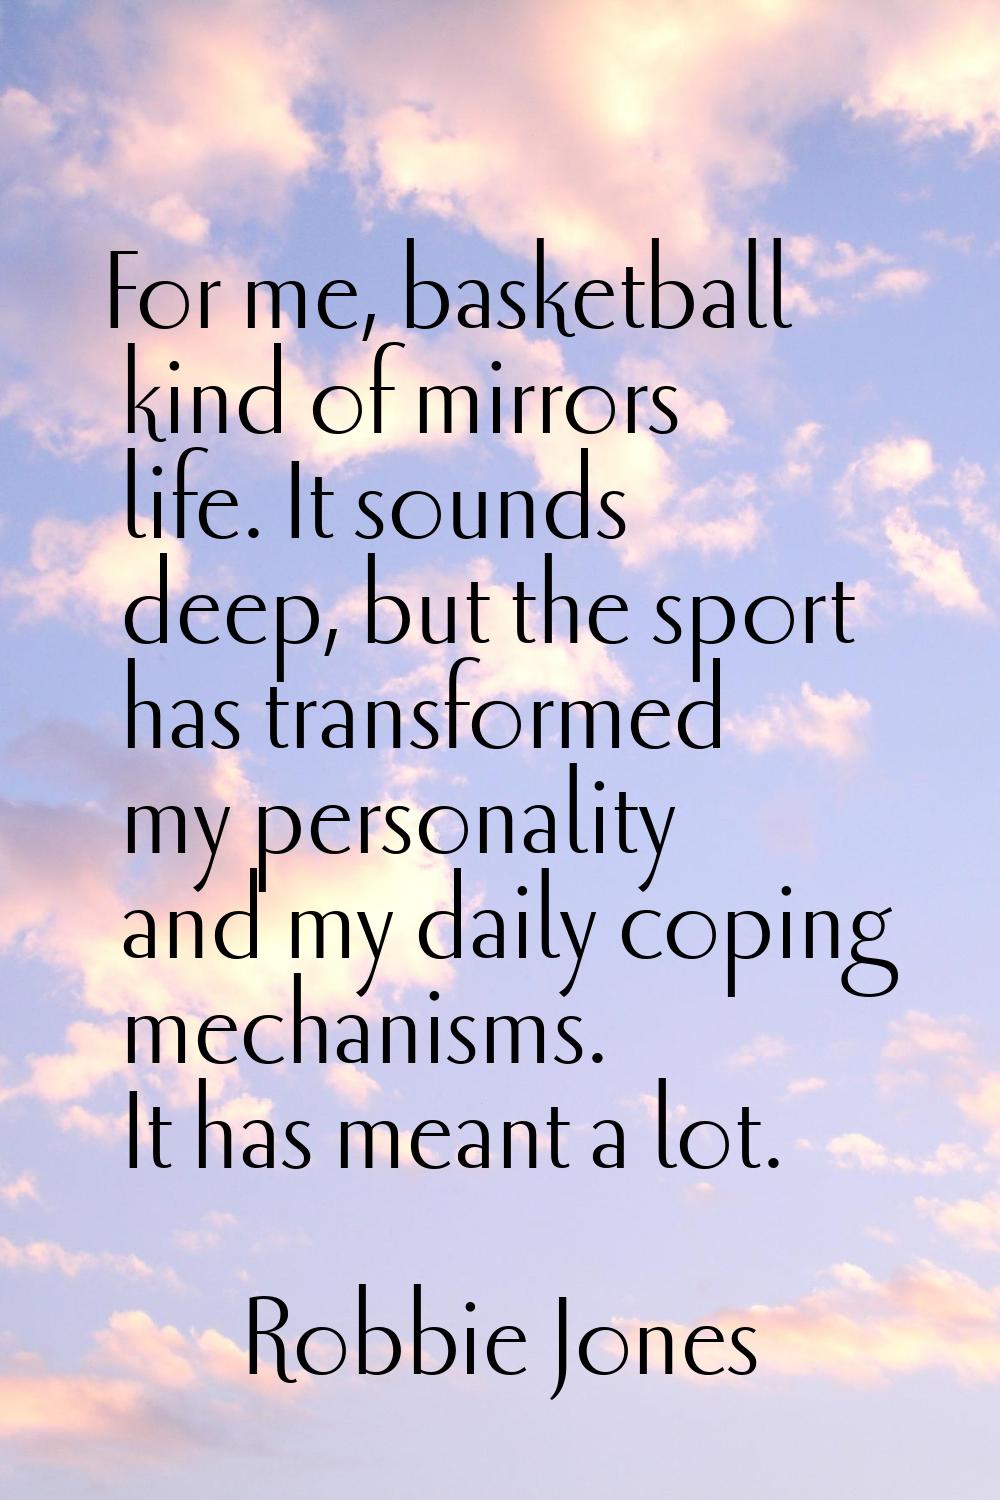 For me, basketball kind of mirrors life. It sounds deep, but the sport has transformed my personali